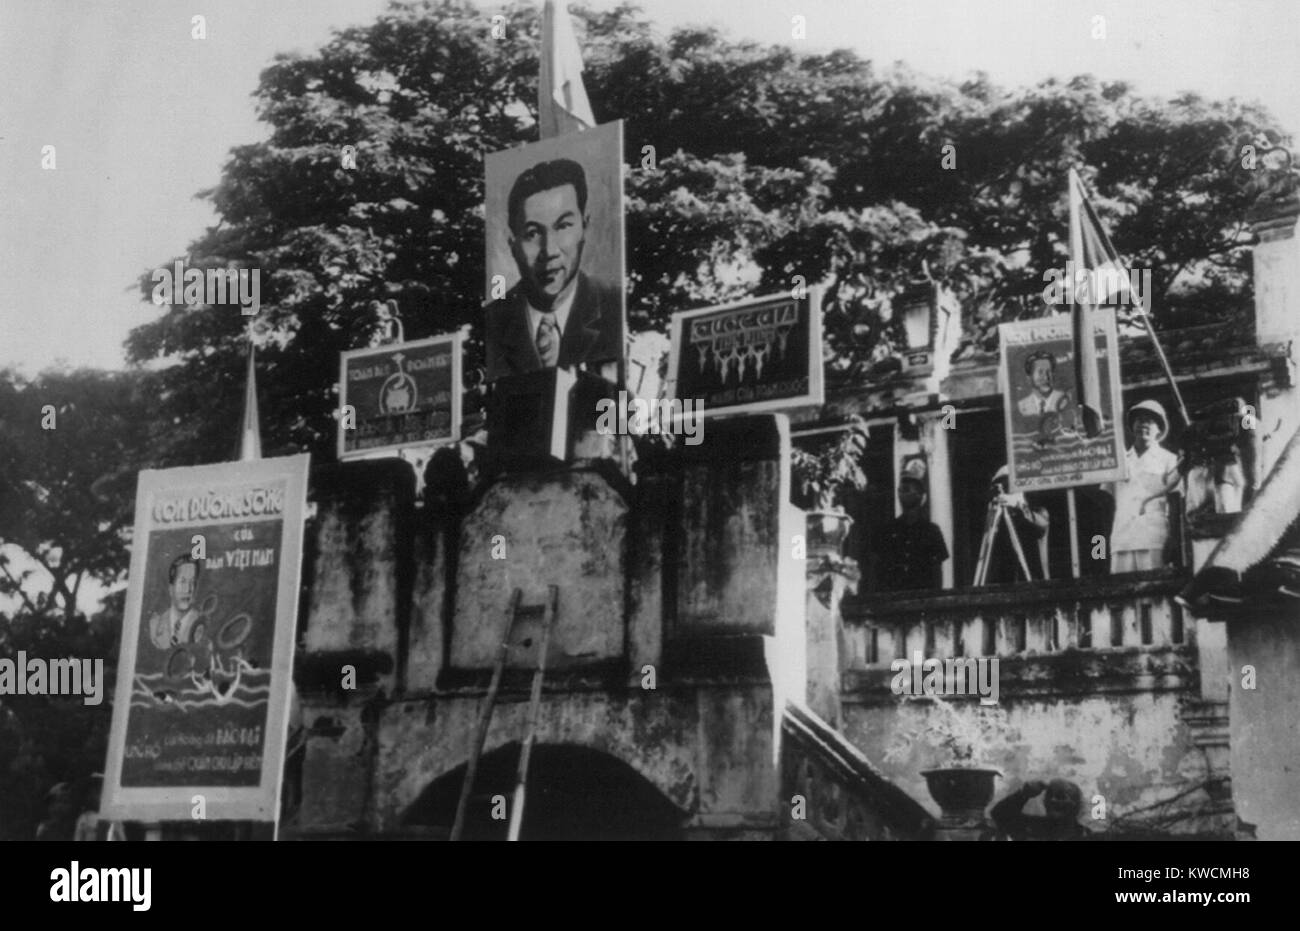 Peace ceremonies between the French Indo-Chinese Vietnam and the French emissaries in 1948. Posters show Bao Dai, the playboy king as 'head of state' of a nominally independent Vietnam. However, it was a protectorate with France controlling foreign relations and defense. - (BSLOC 2014 15 188) Stock Photo